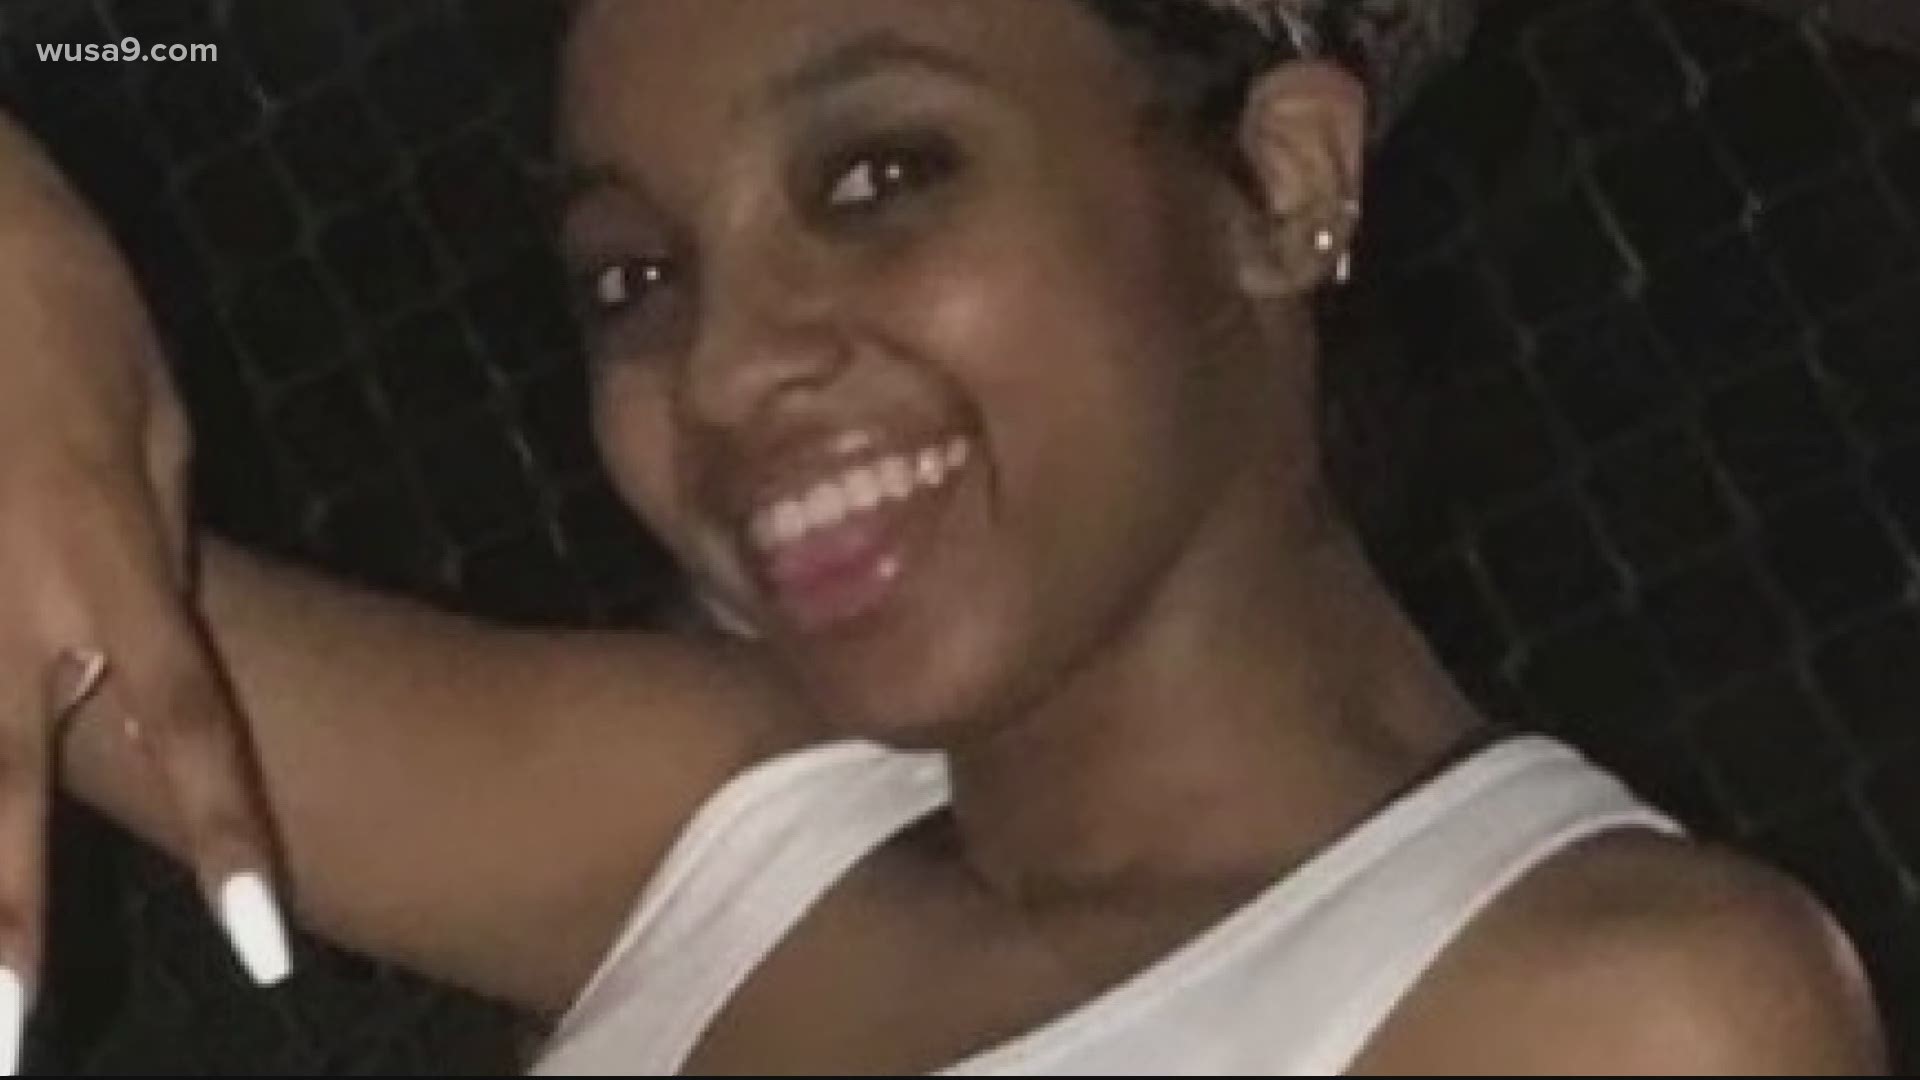 Police found Cierra Young unconscious on the ground after she was shot in Southeast.